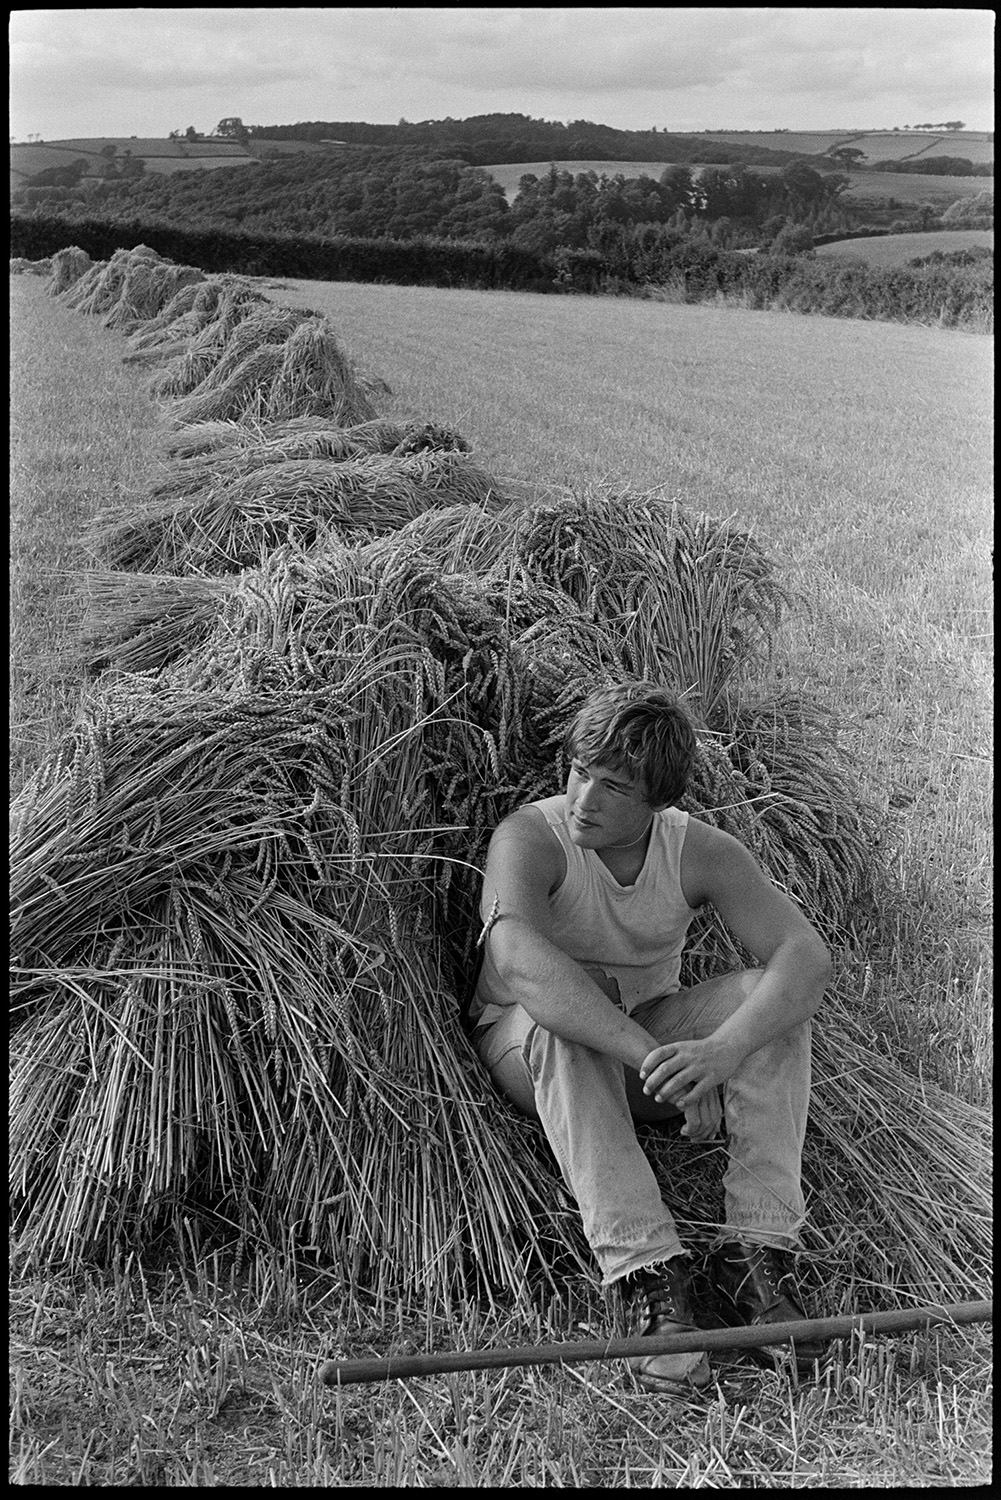 Men loading nitches of wheat onto trailer, resting on their pitchforks. Farmer on motorbike. 
[ A boy, possibly Bryan Down, sitting at the end of a row of stooks of wheat in a field at Spittle, Chulmleigh. The handle of a pitch fork can be seen in front of him.]